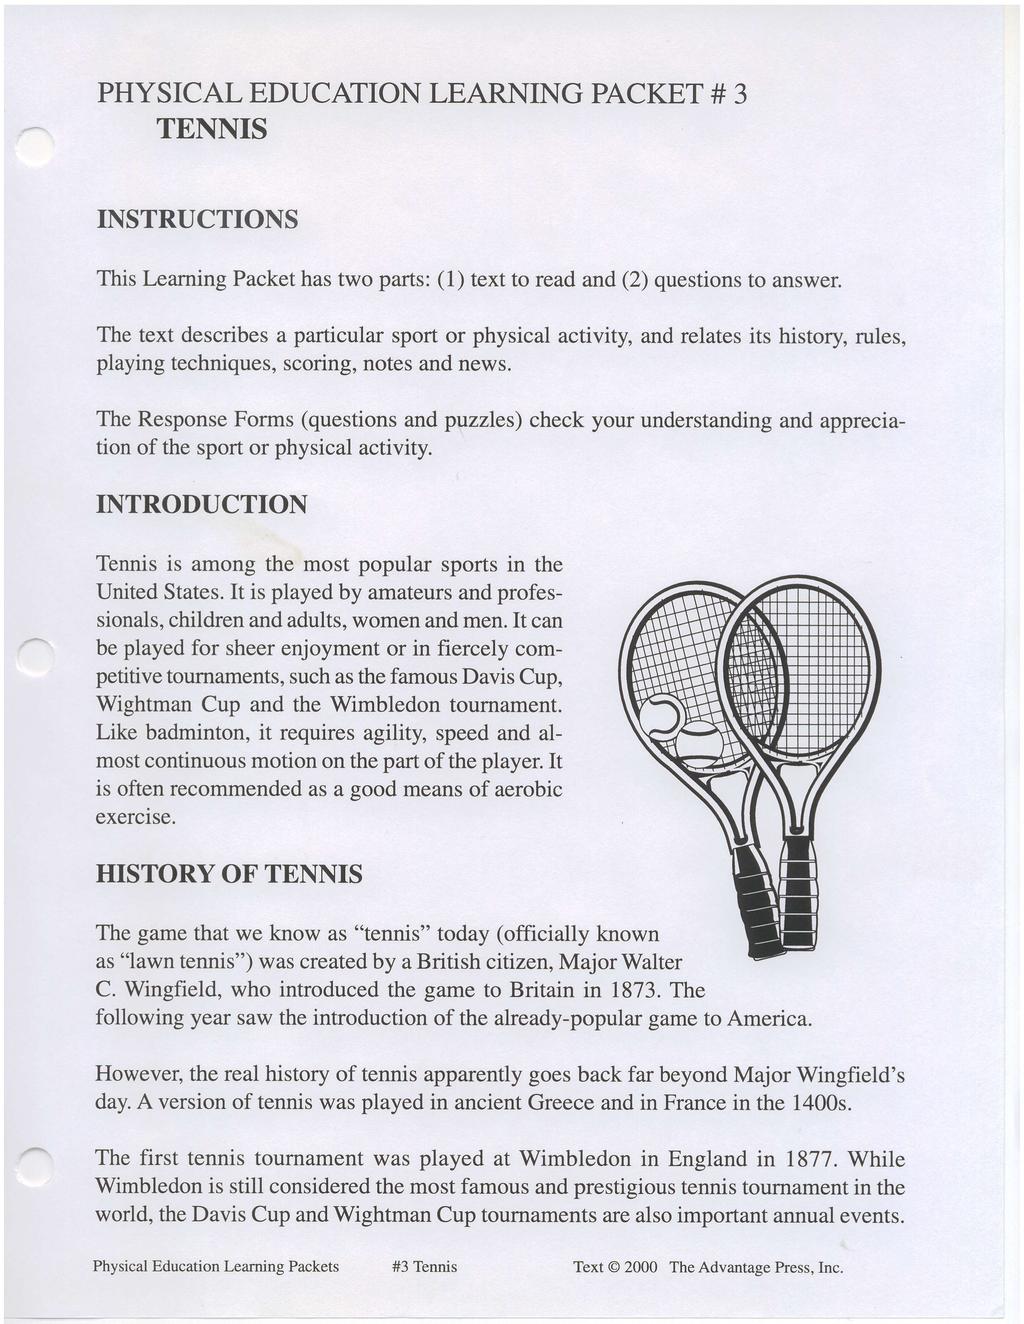 PHYSICAL EDUCATIONT LEARNING PACKET # 3 TENNIS INSTRUCTIONS This Learning Packet has tw parts: (1) text t read and (2) questins t answer.